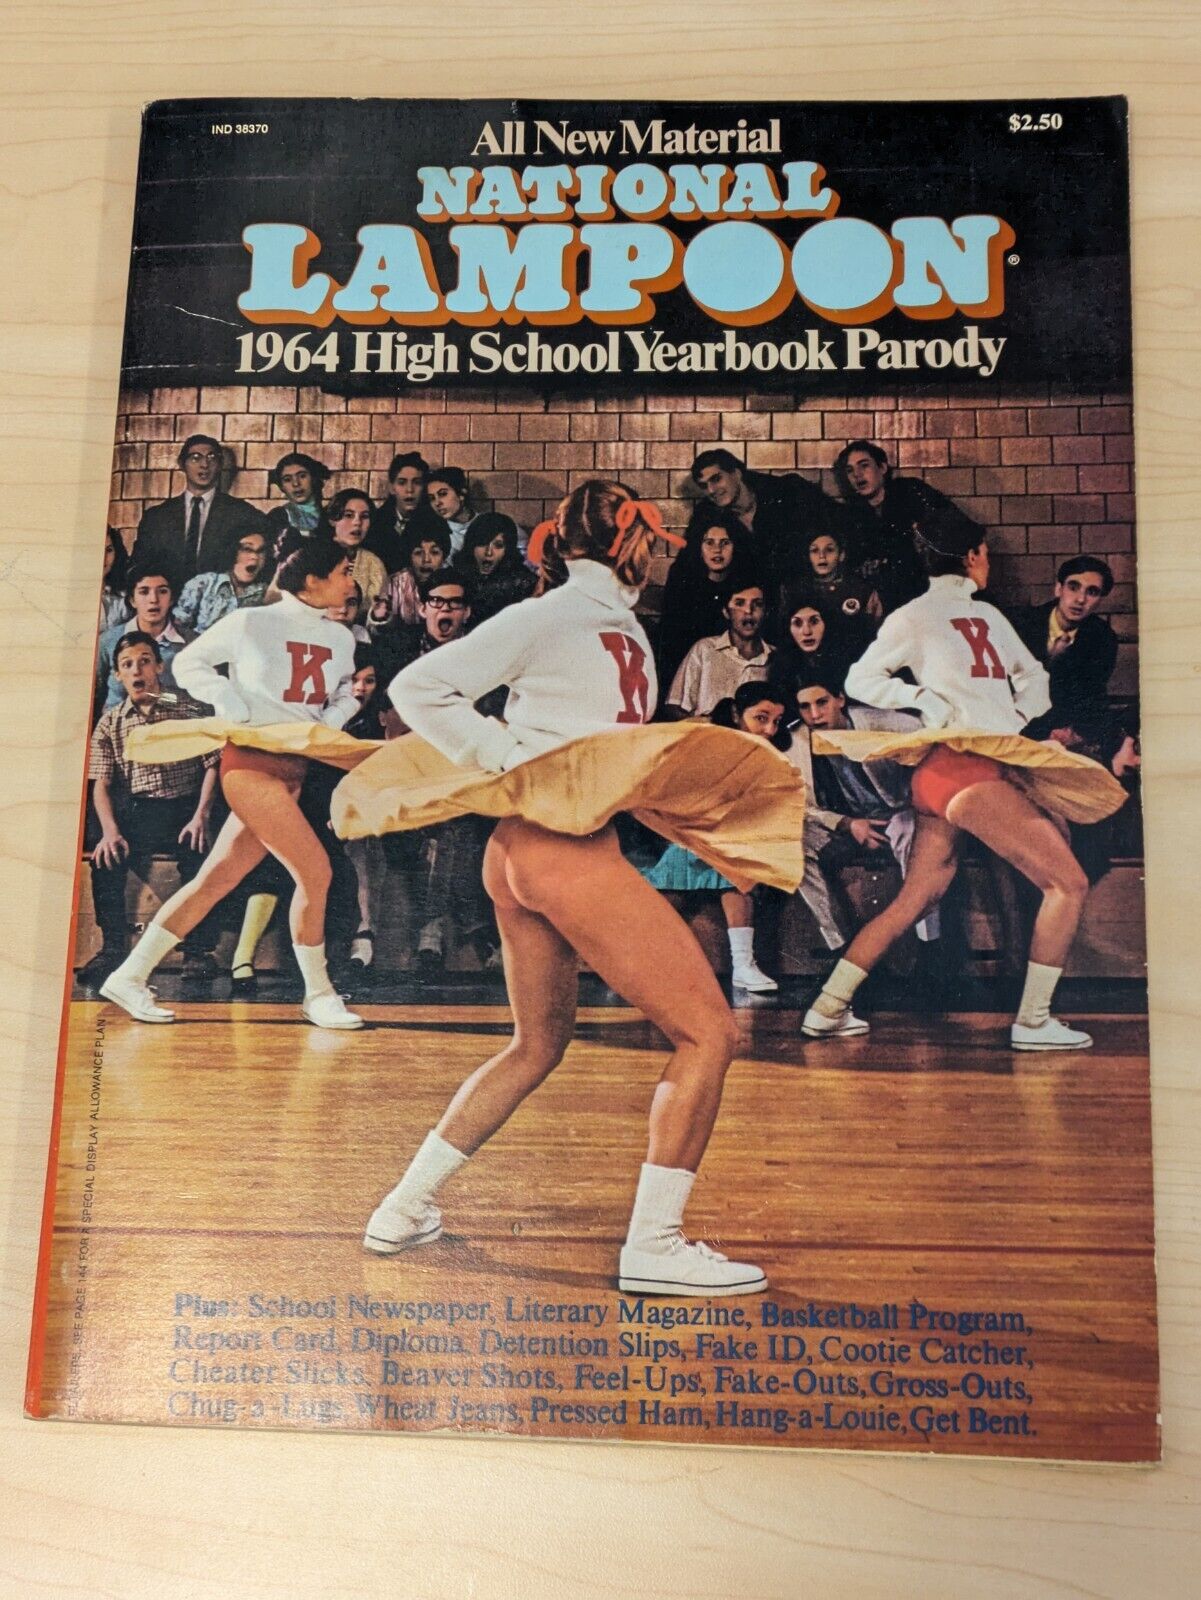 RARE NATIONAL LAMPOON HIGH SCHOOL PARODY ISSUE 1974 EXCELLENT CONDITION NOT READ